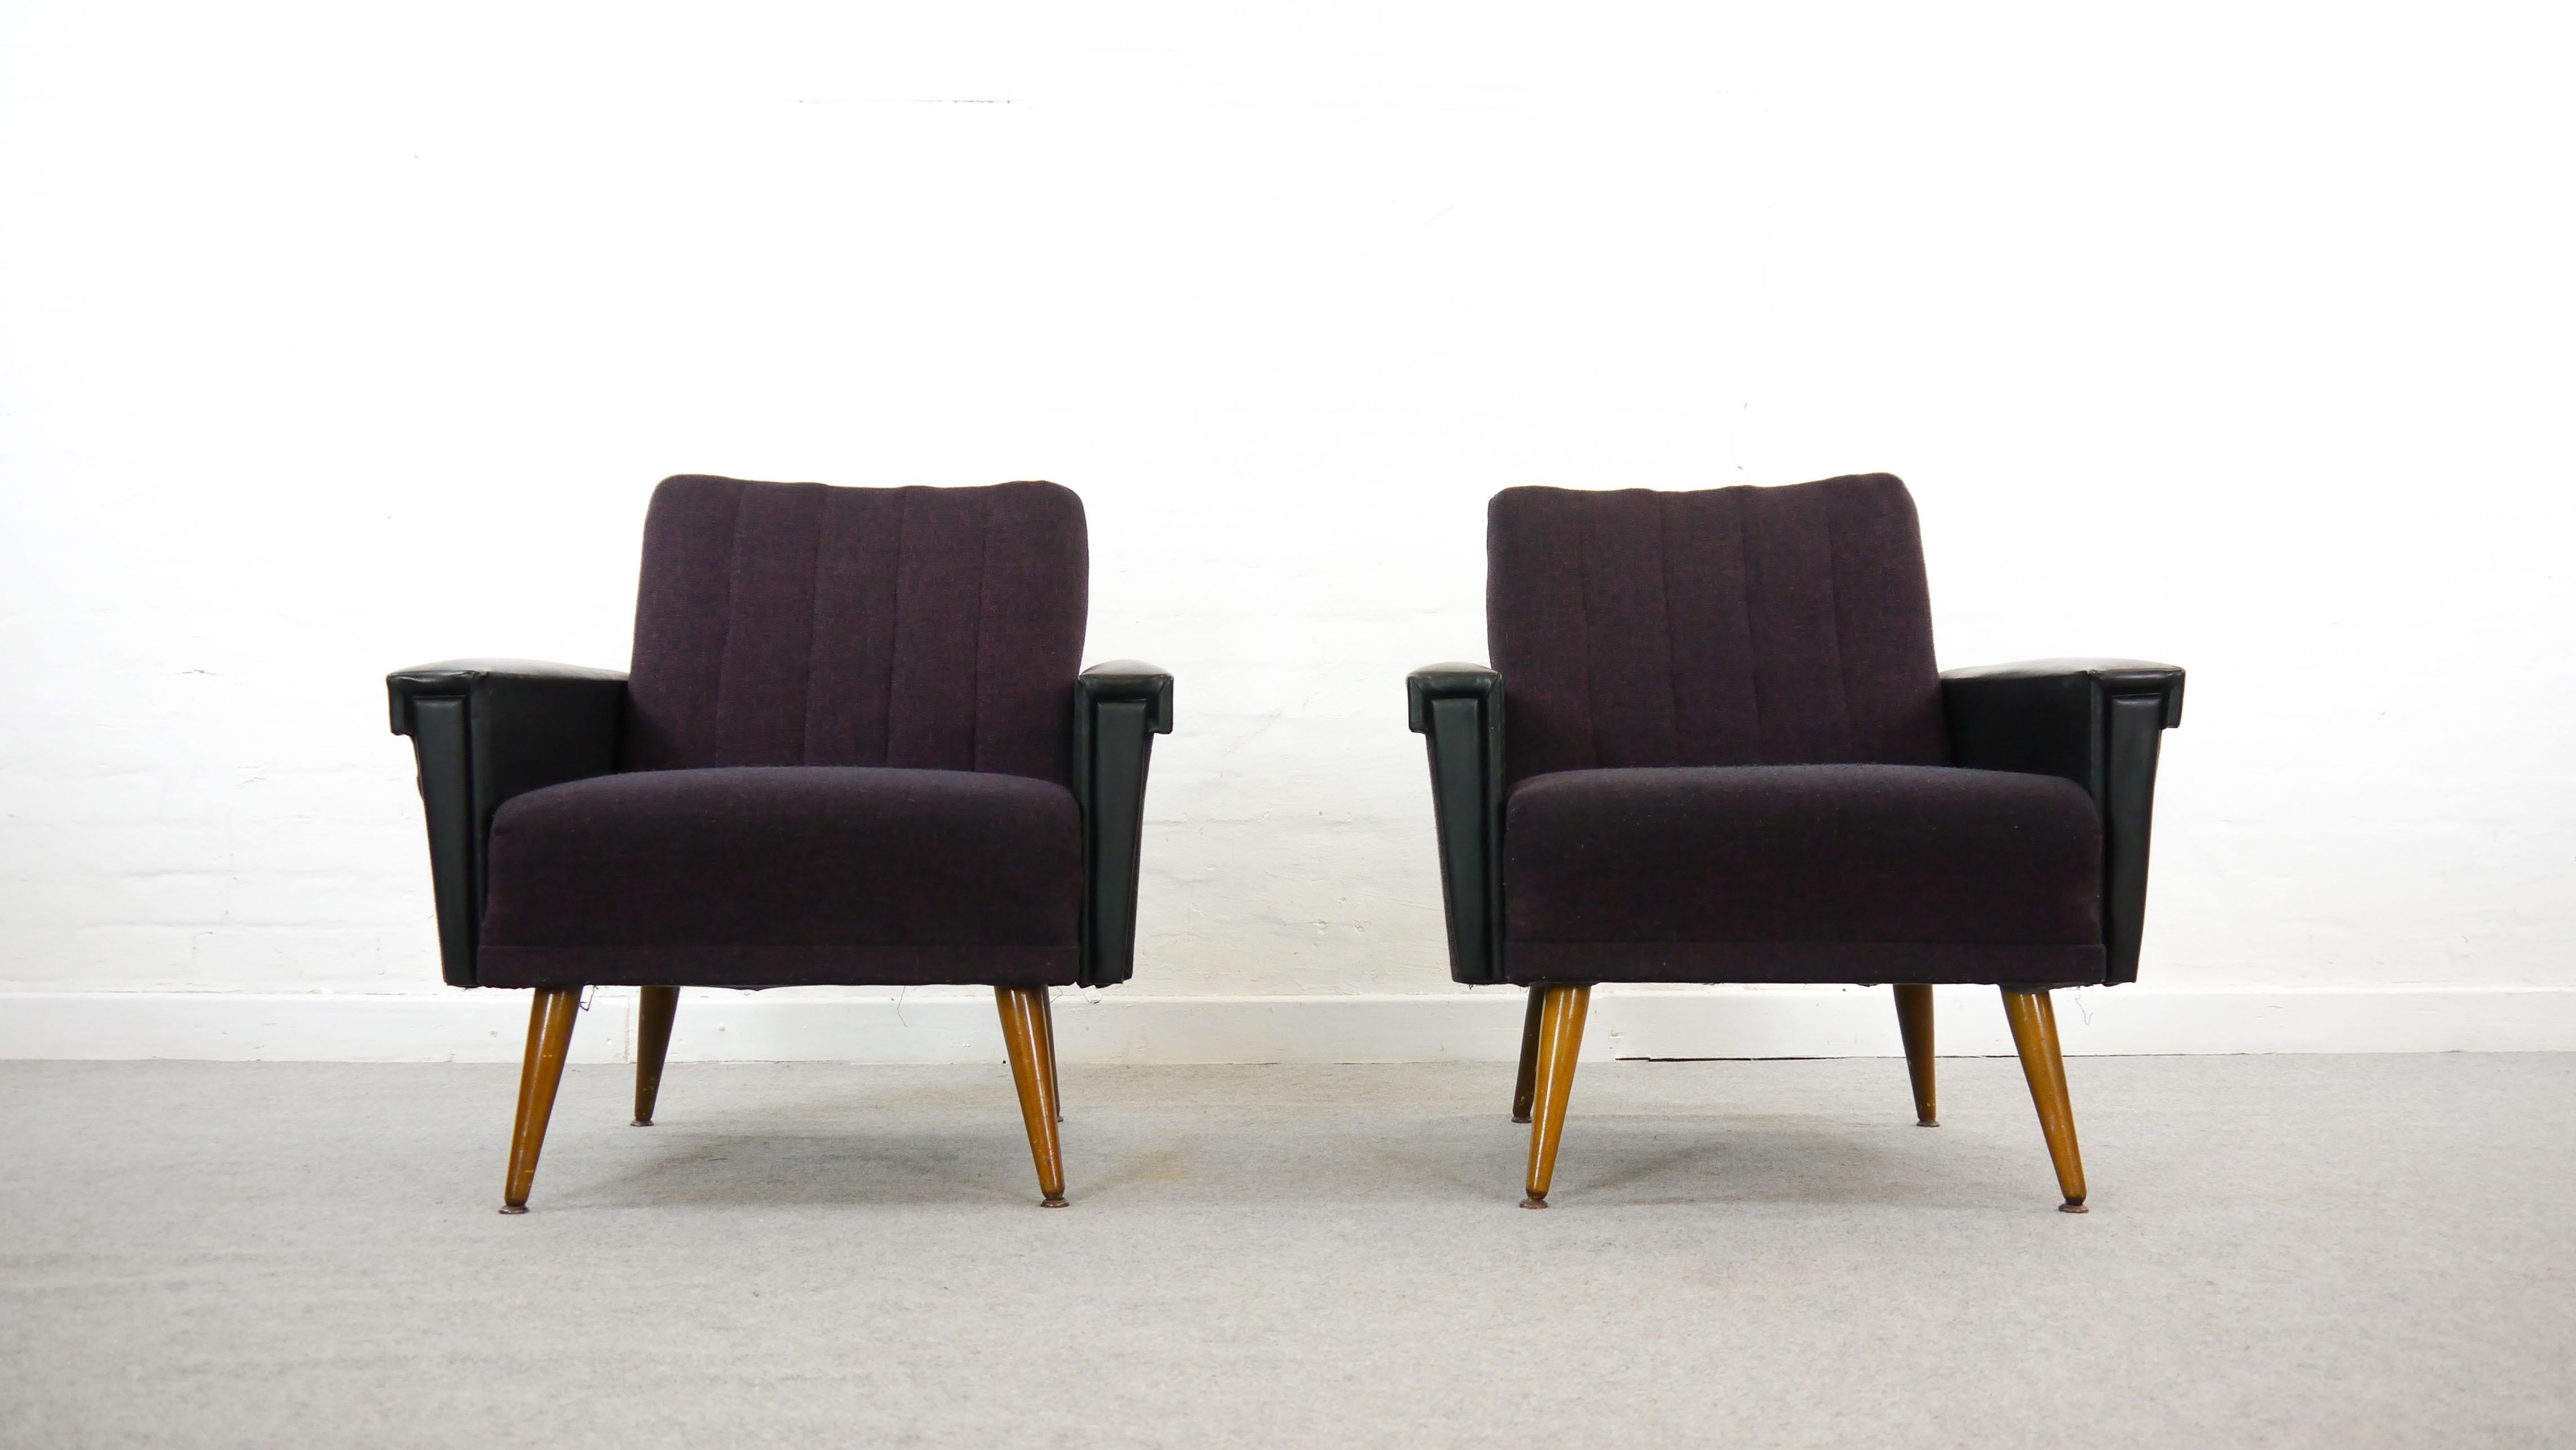 Pair (2) of armchairs or easy chairs from the 1950s-1960s. Upholstered in purple fabric and leatherette (armrests) on wooden legs. Typical charming 1950s appearance. Seating experience is good. Designer and manufacturer unknown.